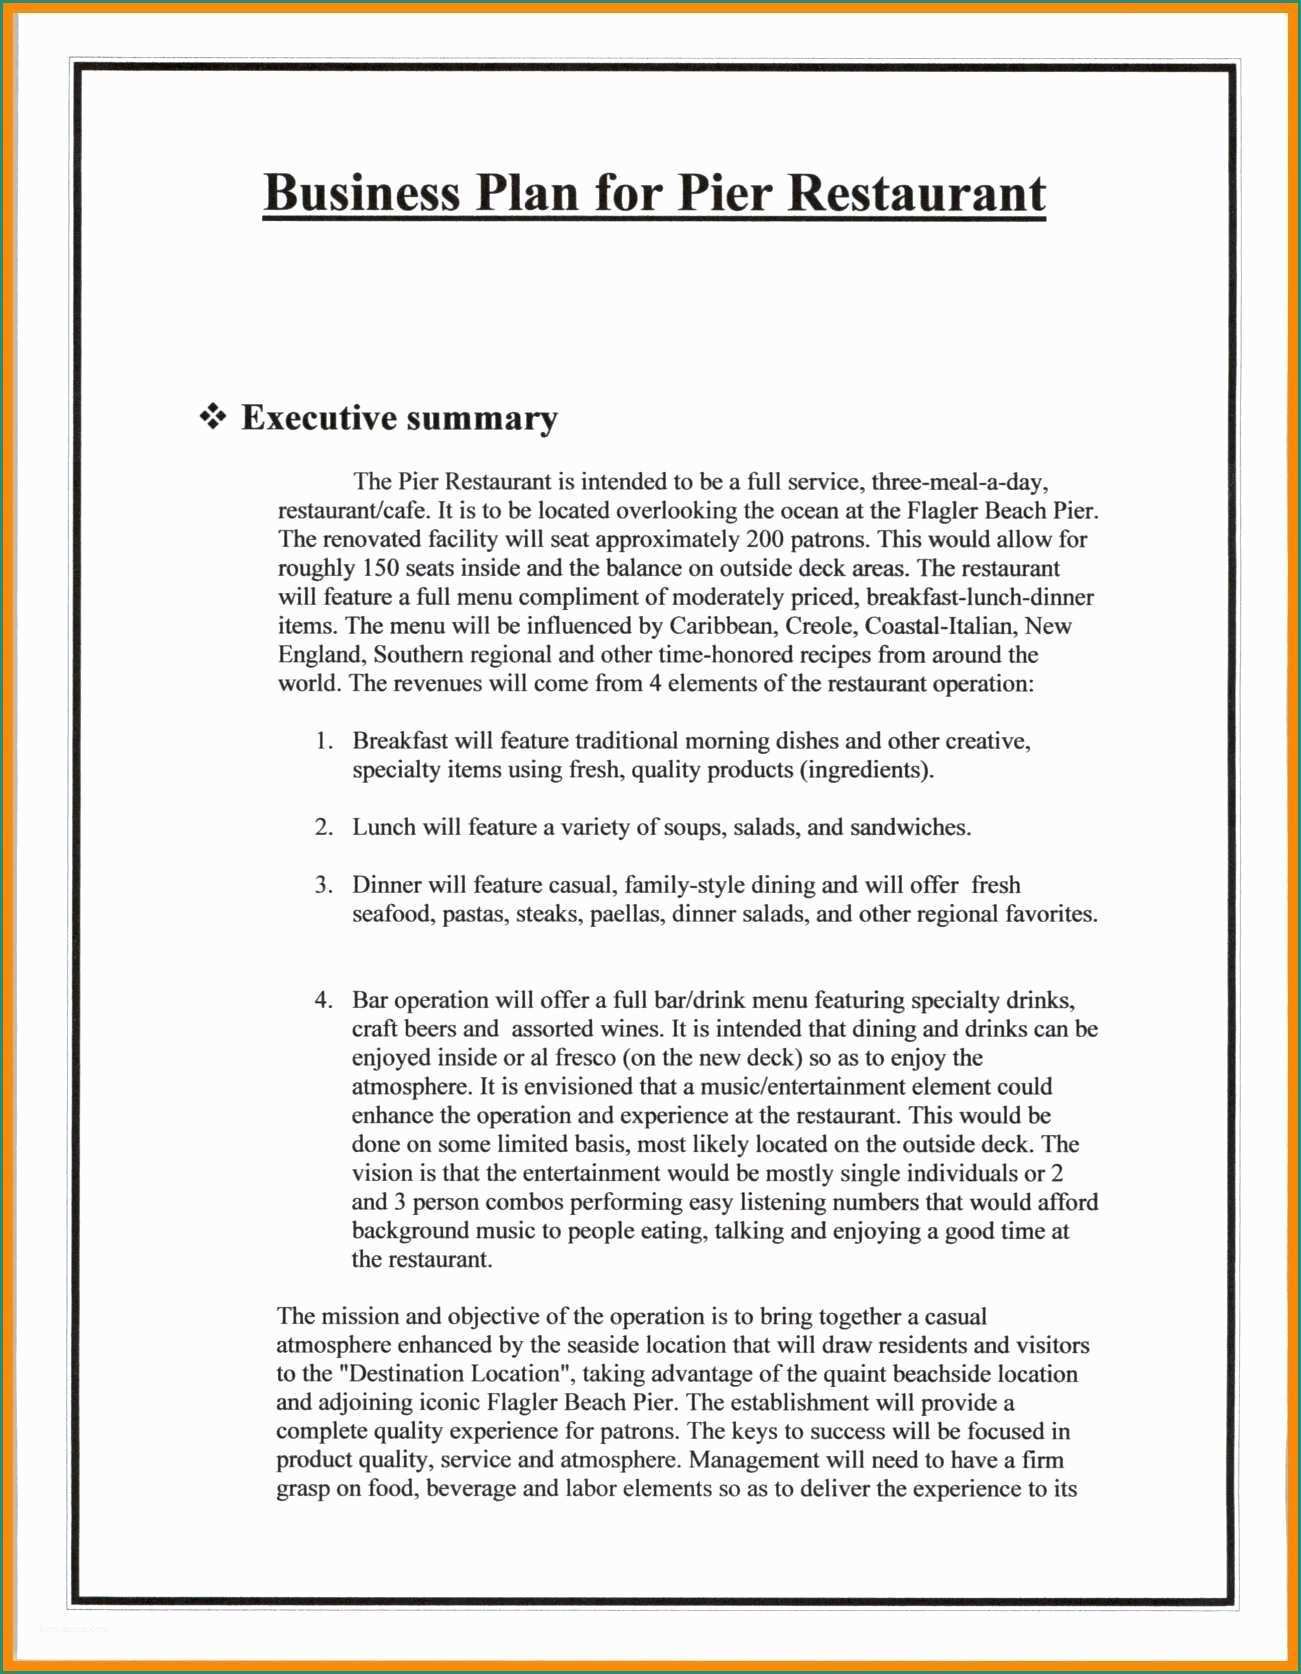 Vienna Bampb E Pretty Bed and Breakfast Business Plan Template Gallery